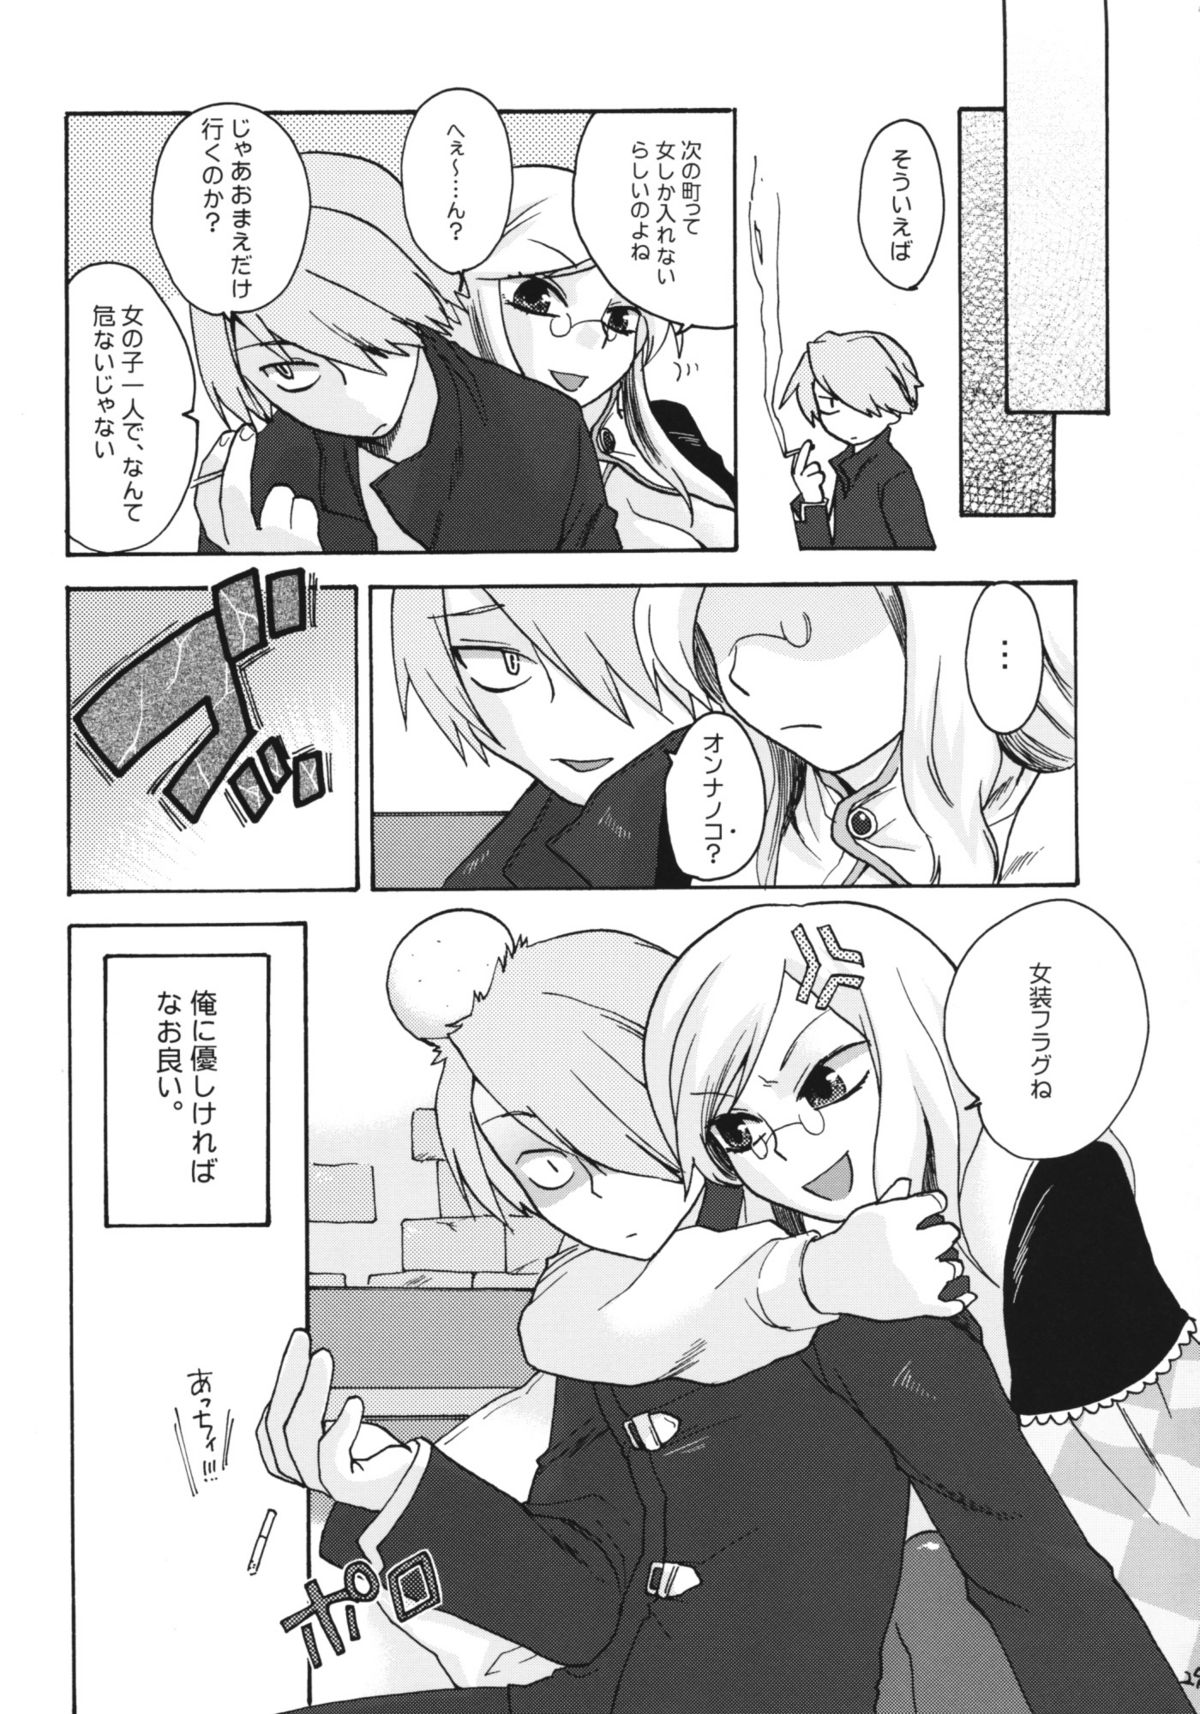 (ComiComi13) [Trip Spider (niwacho)] In You And Me (7th DRAGON) page 28 full